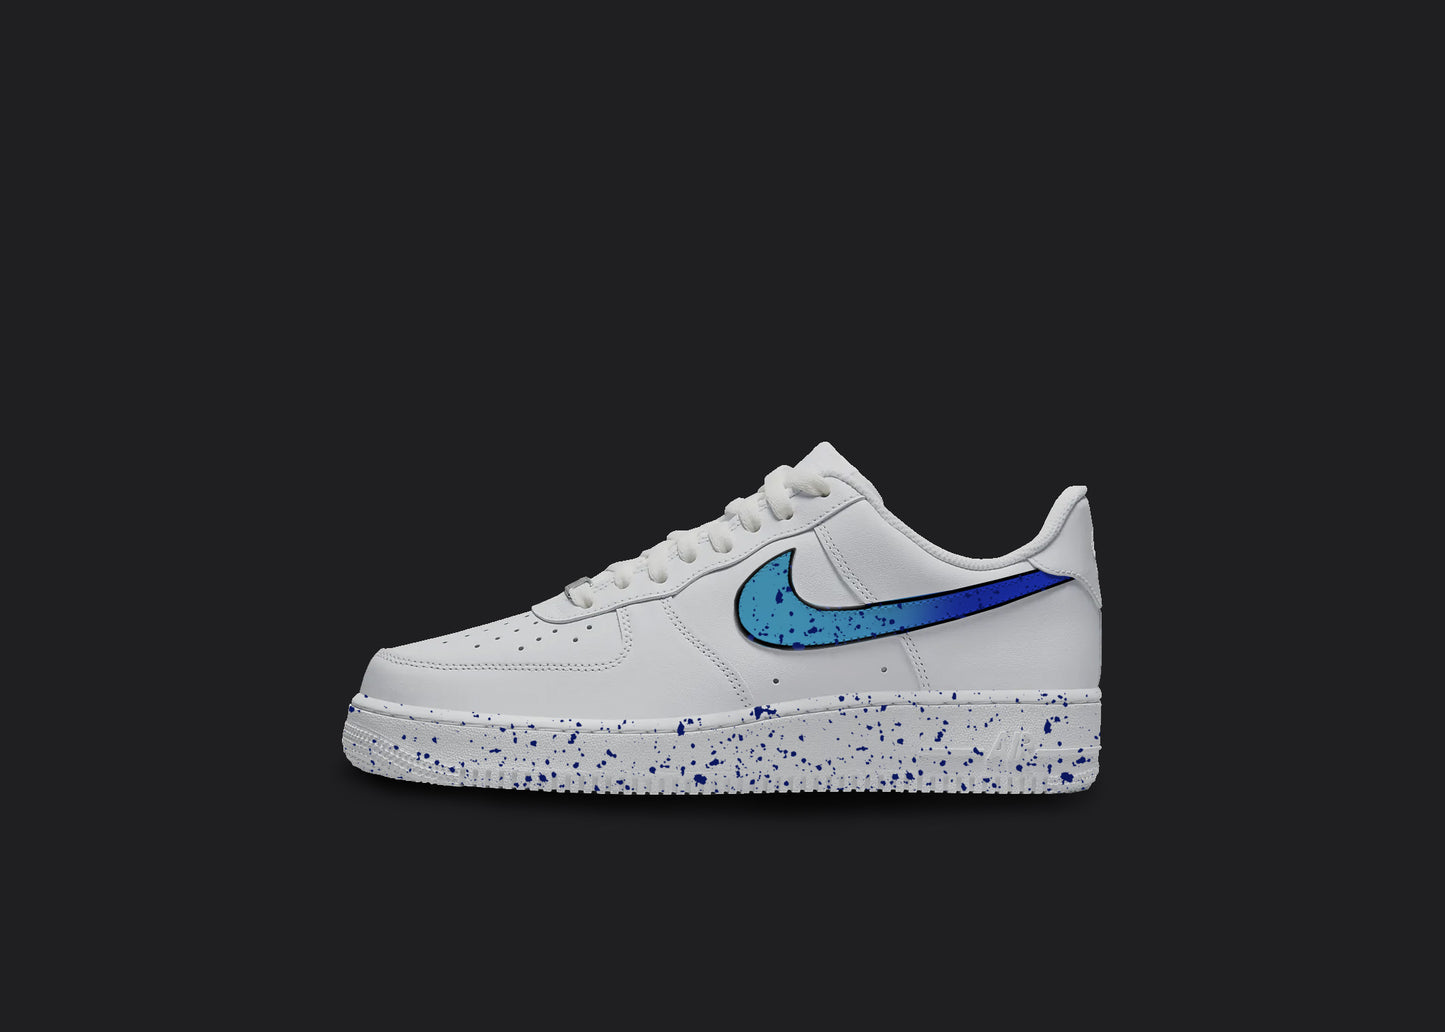 The image is of a Custom Nike Air force 1 sneaker on a blank black background. The white custom nike sneaker has a blue splatter covering the sole and the nike logo.  